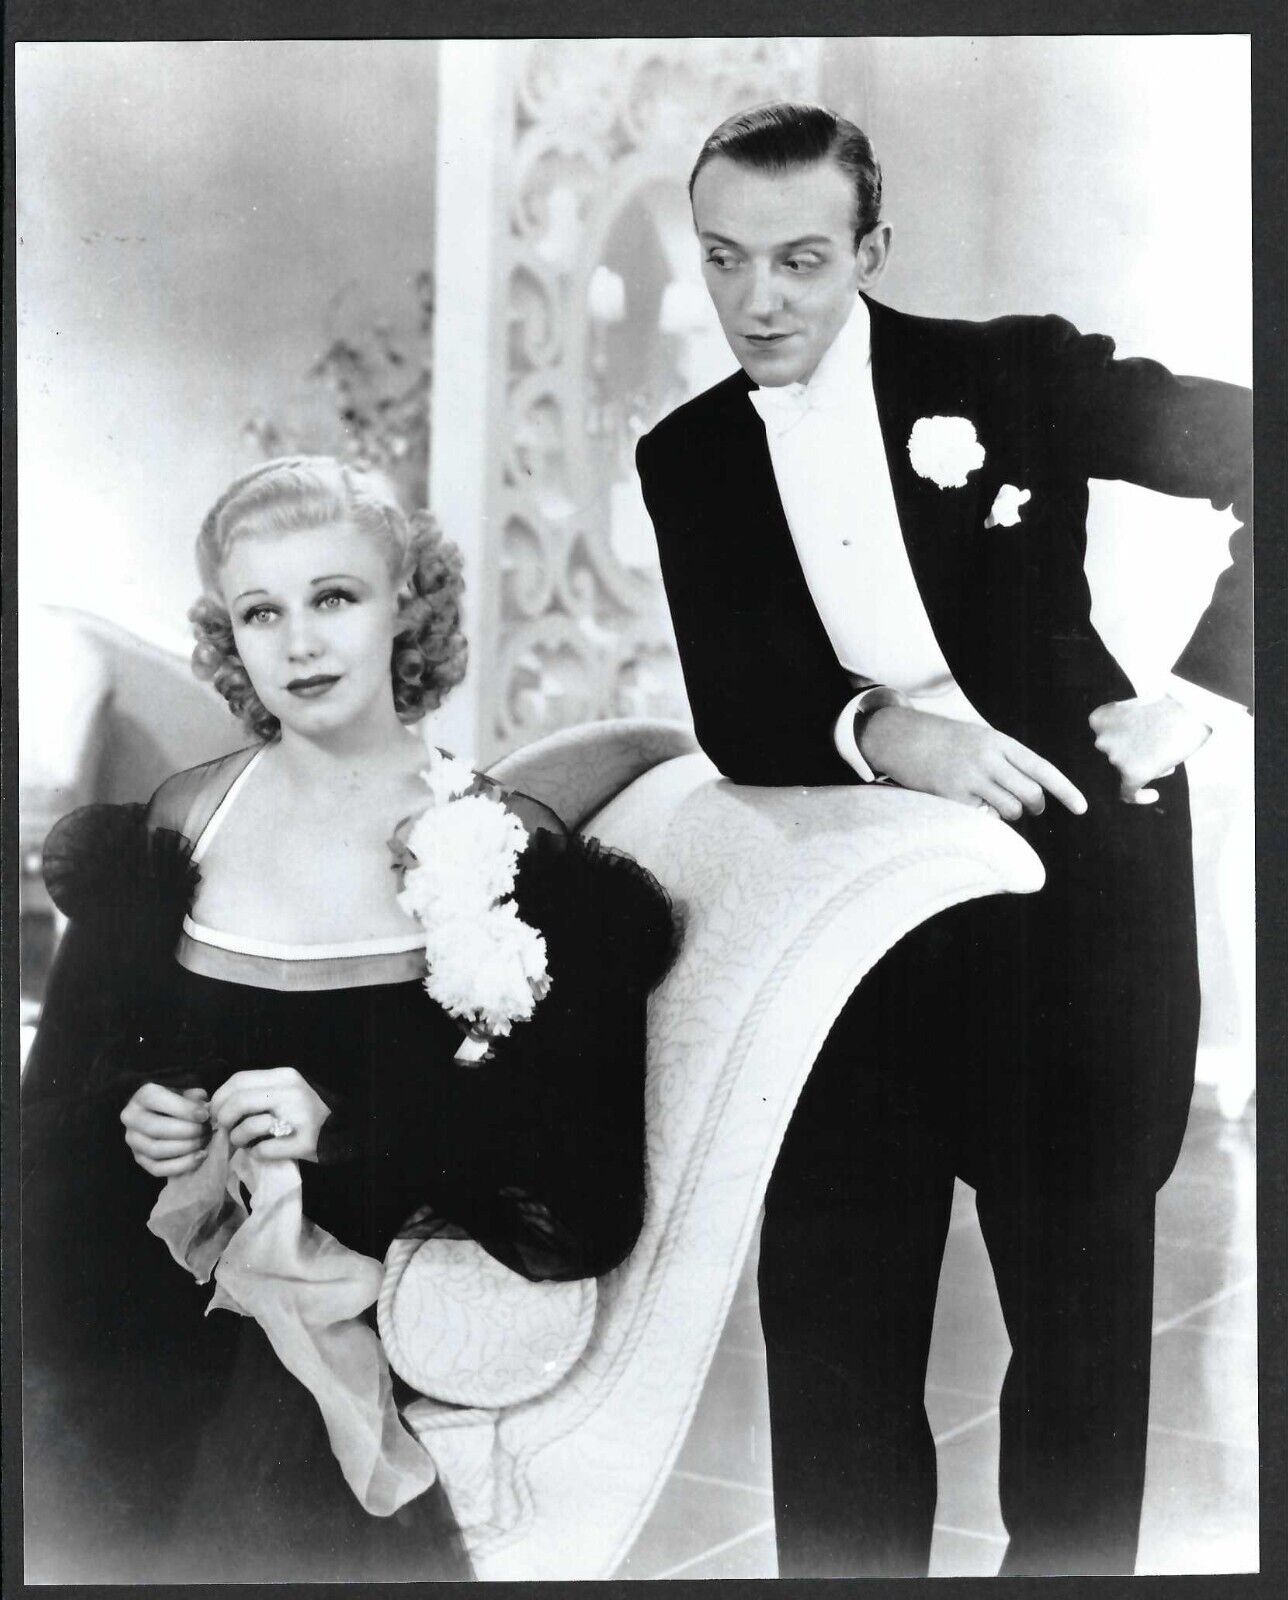 FRED ASTAIRE + GINGER ROGERS EXQUISITE ELEGANT STUNNING PHOTO